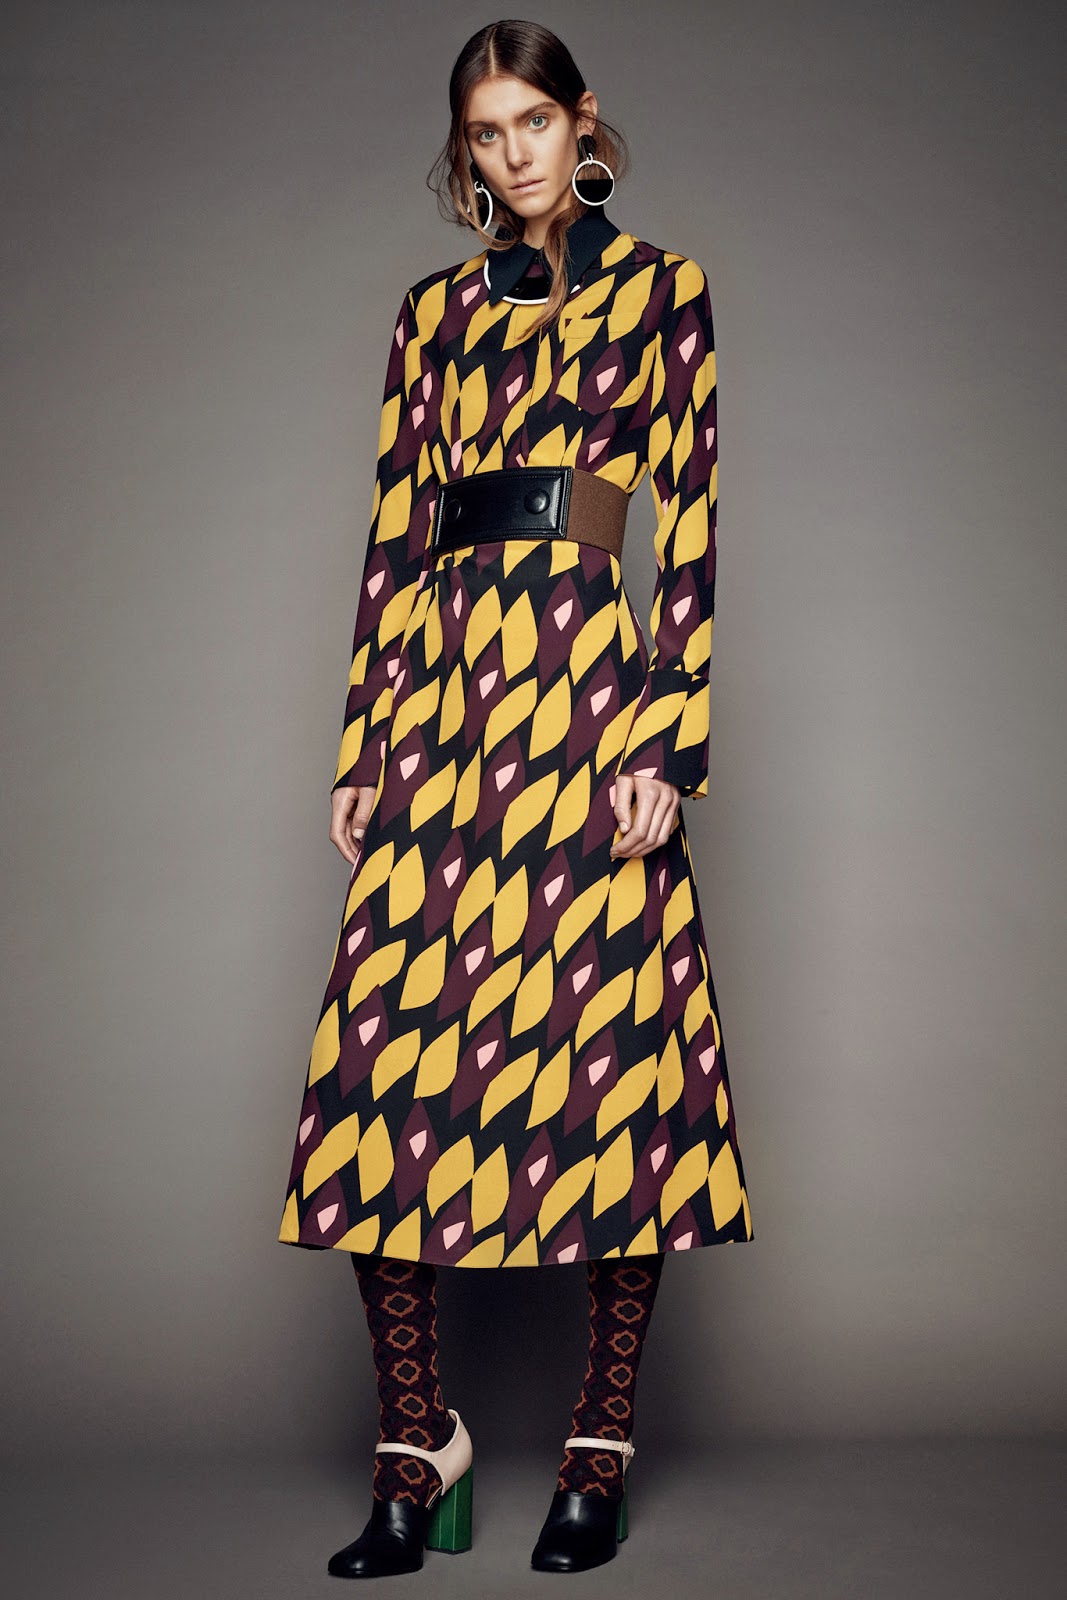 Serendipitylands: MARNI COLLECTION PRE-FALL 2015